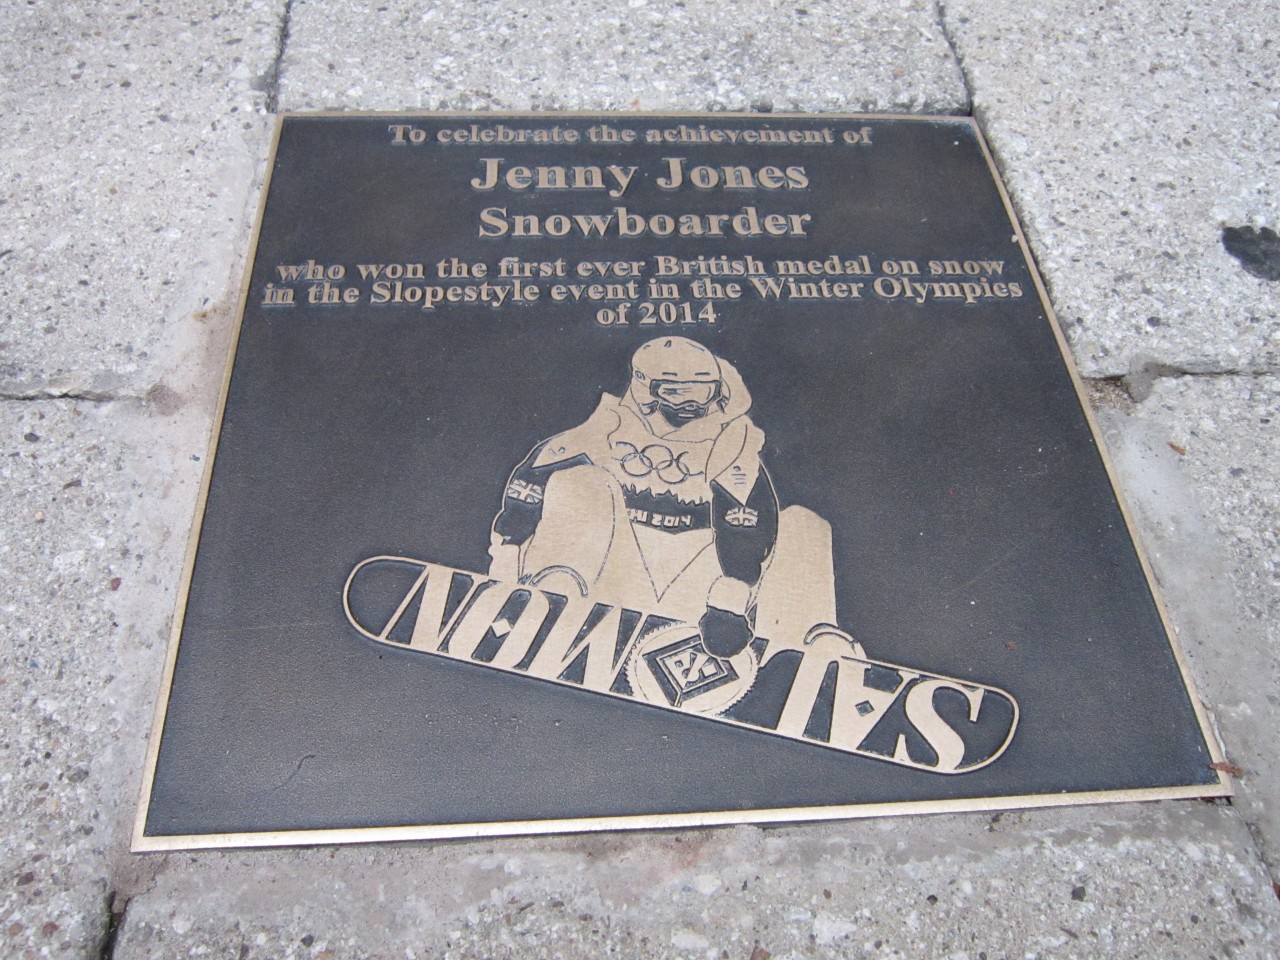 Unveiling of plaque by Jenny Jones, Olympic Snowboarder